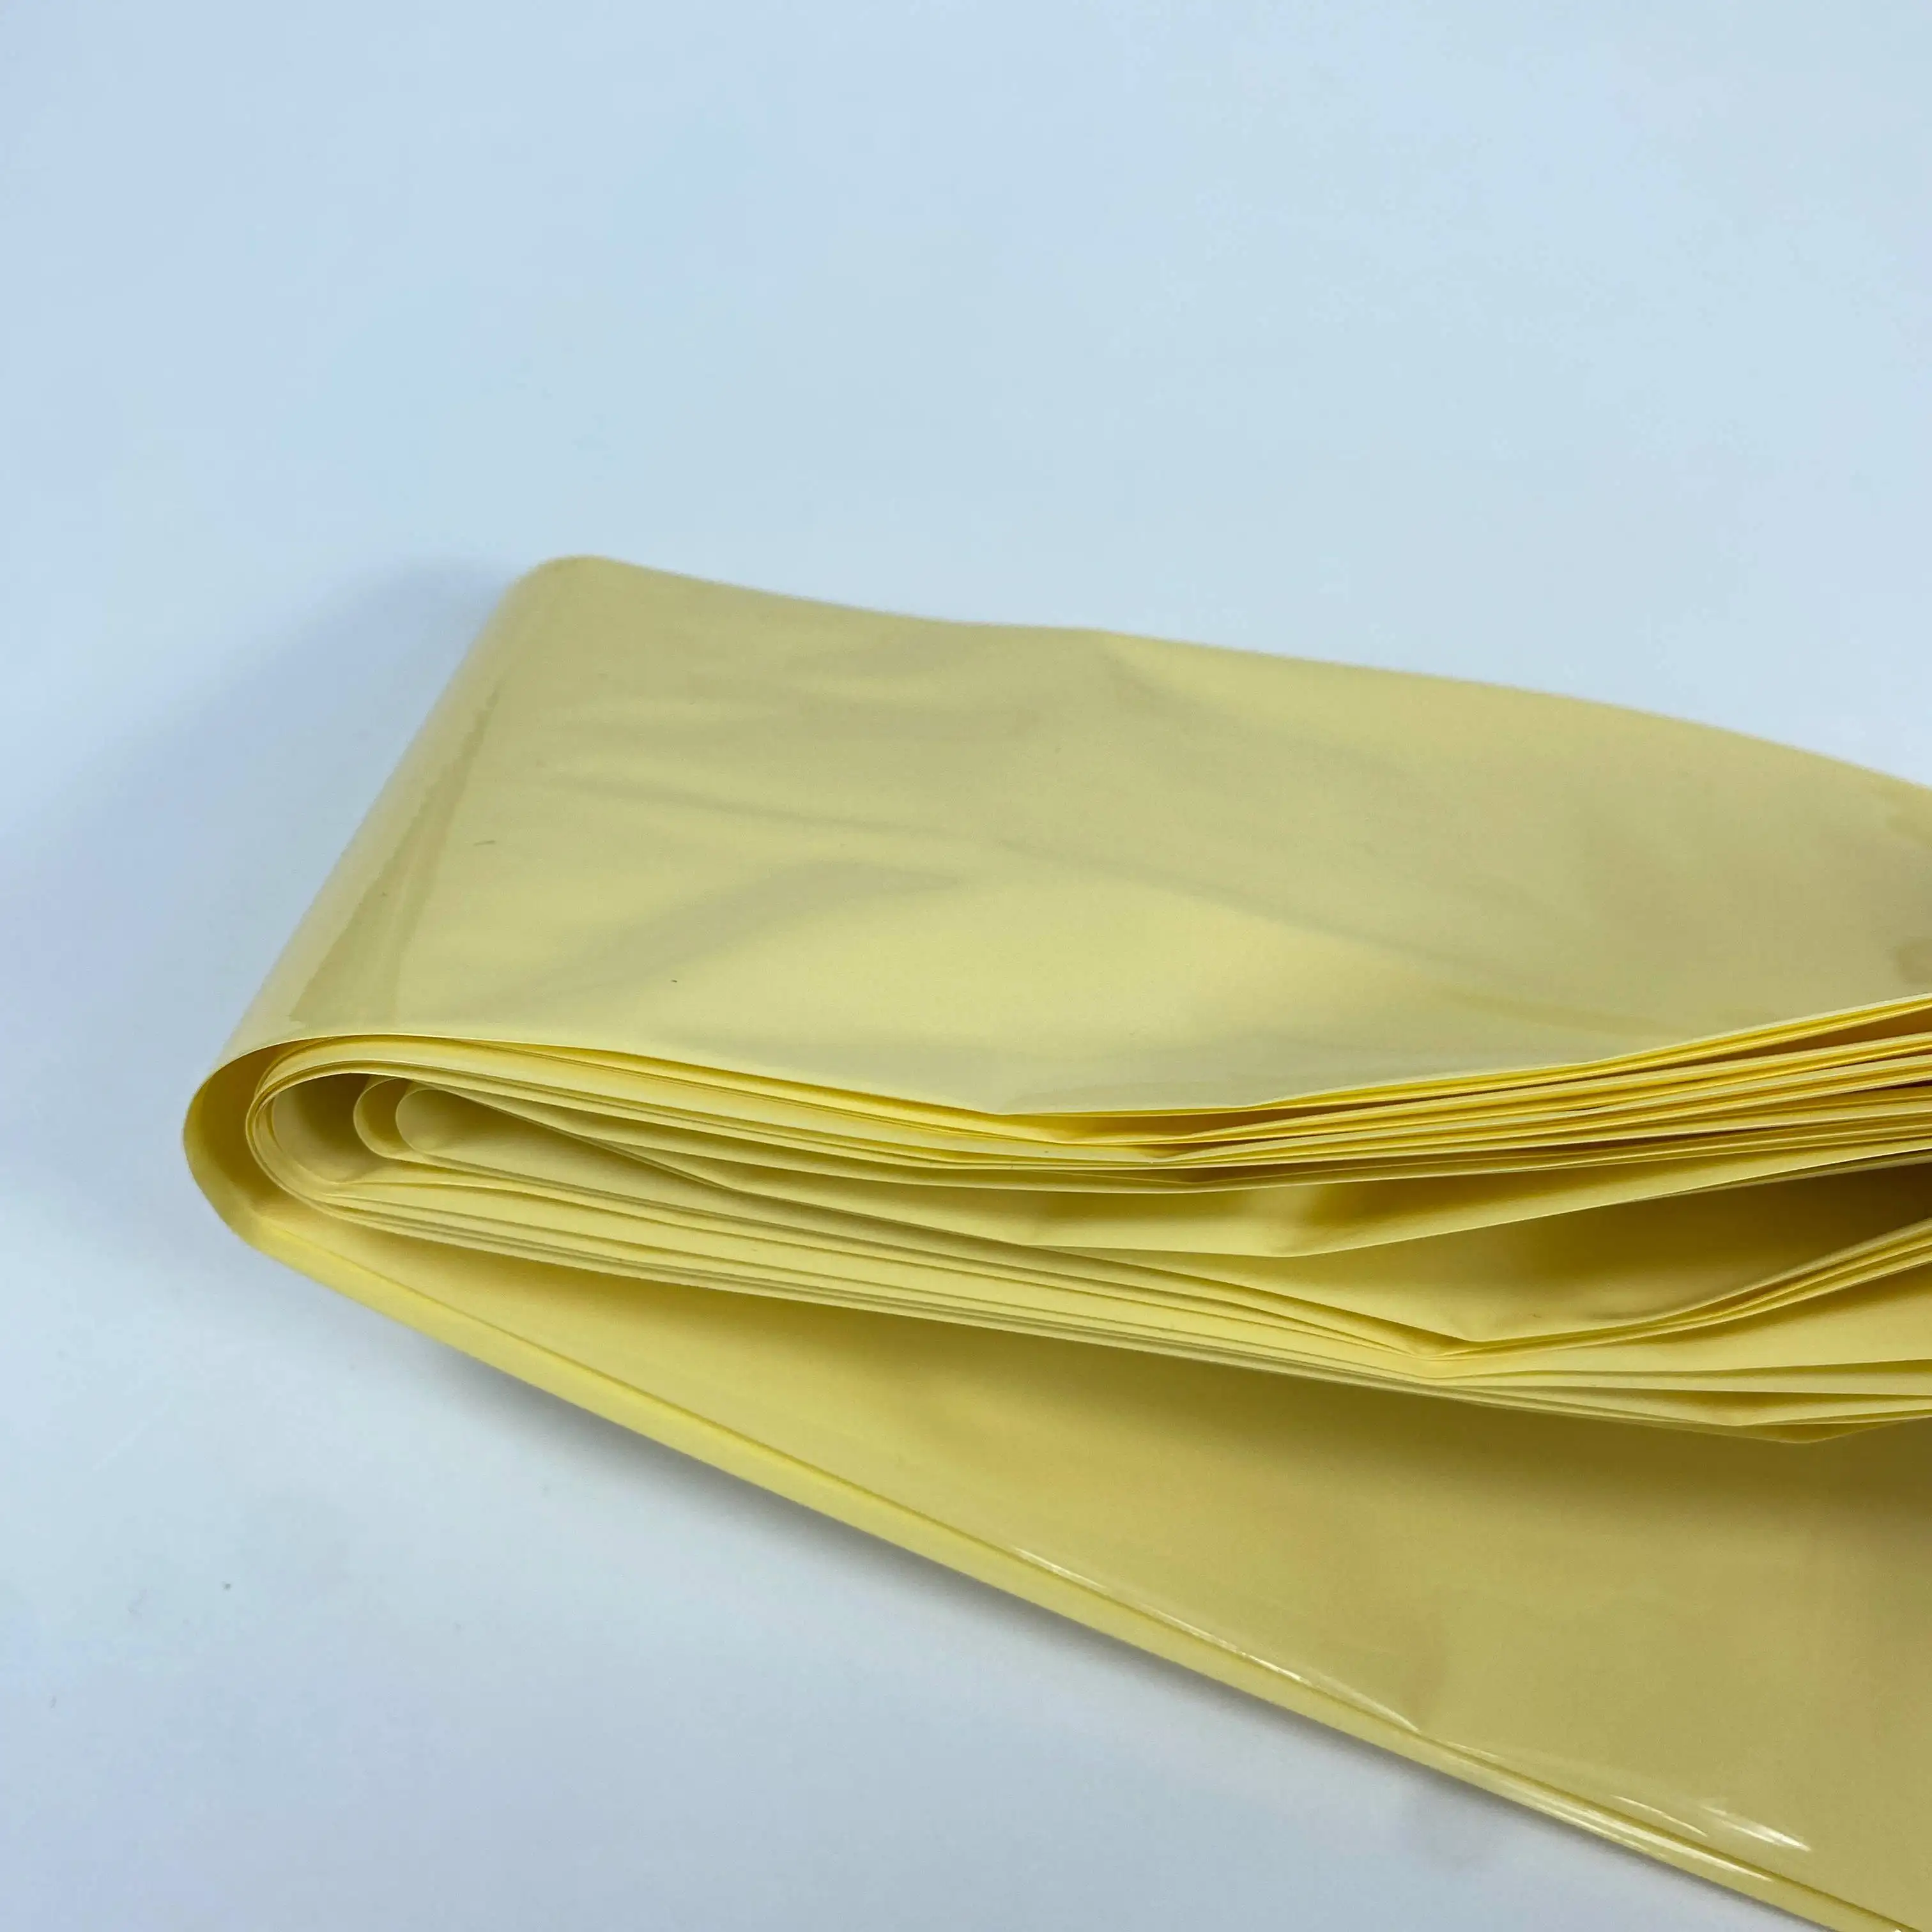 PVC Cling Film 30cm Food Packaging Film Stretching Plastic Wrap for Big Rolls for Food Packaging